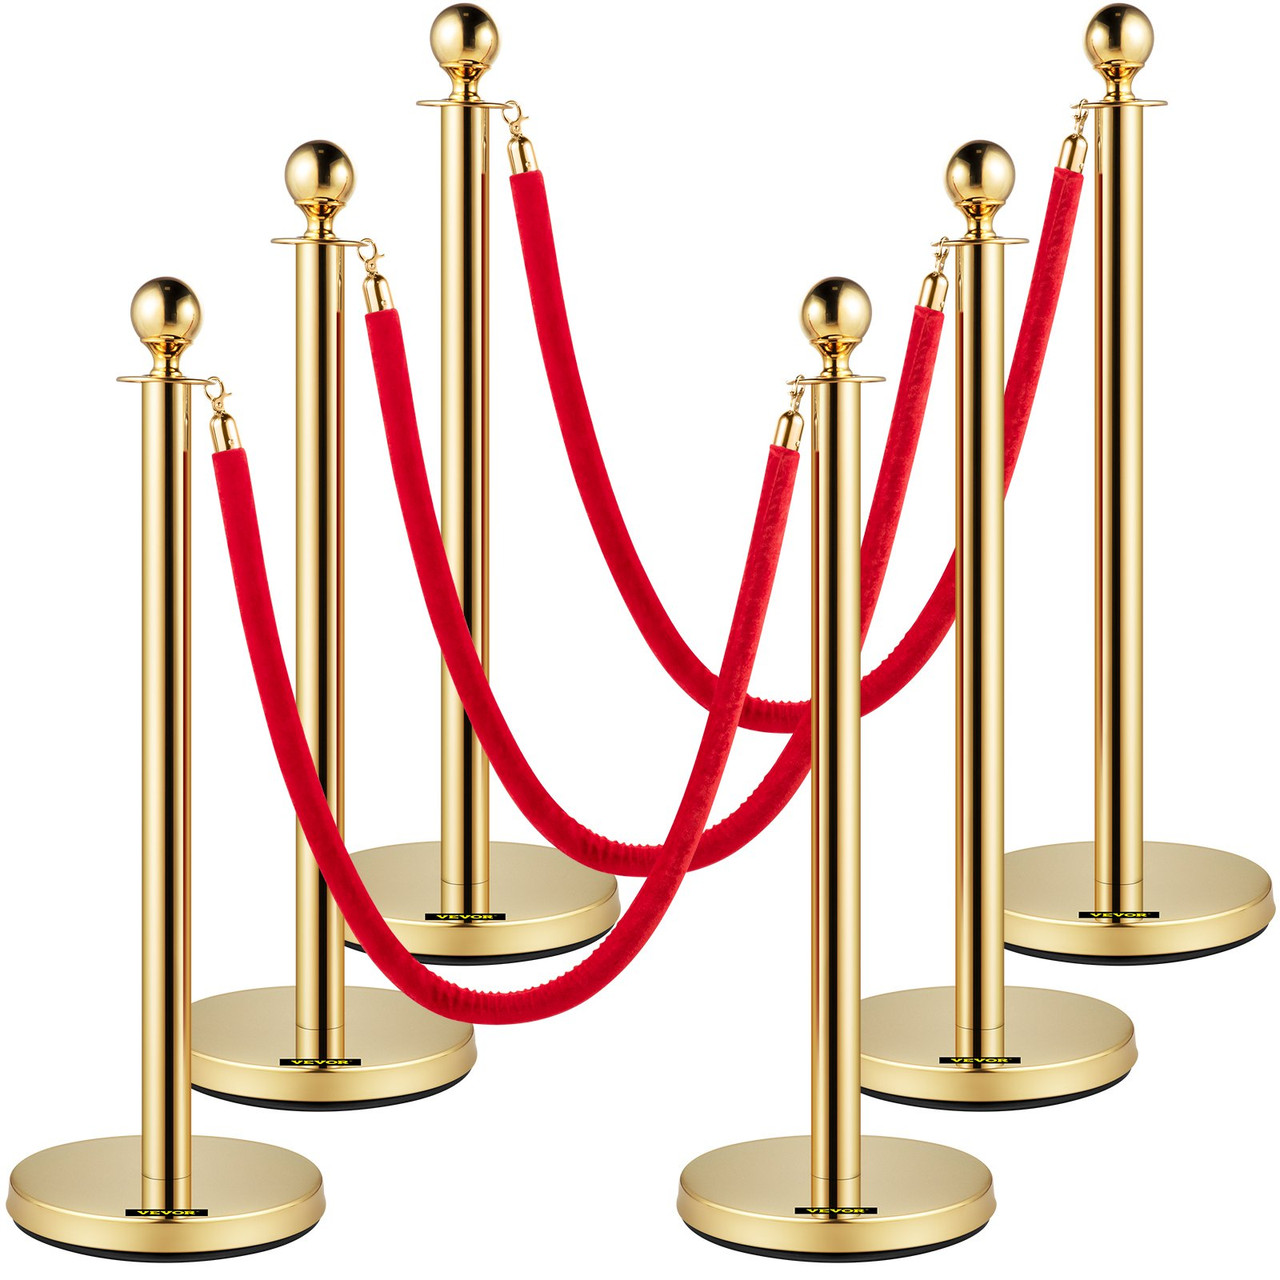 Velvet Ropes and Posts, 5 ft/1.5 m Red Rope, Stainless Steel Gold Stanchion with Ball Top, Red Crowd Control Barrier Used for Theaters, Party, Wedding, Exhibition, Ticket Offices Pack Sets (6)